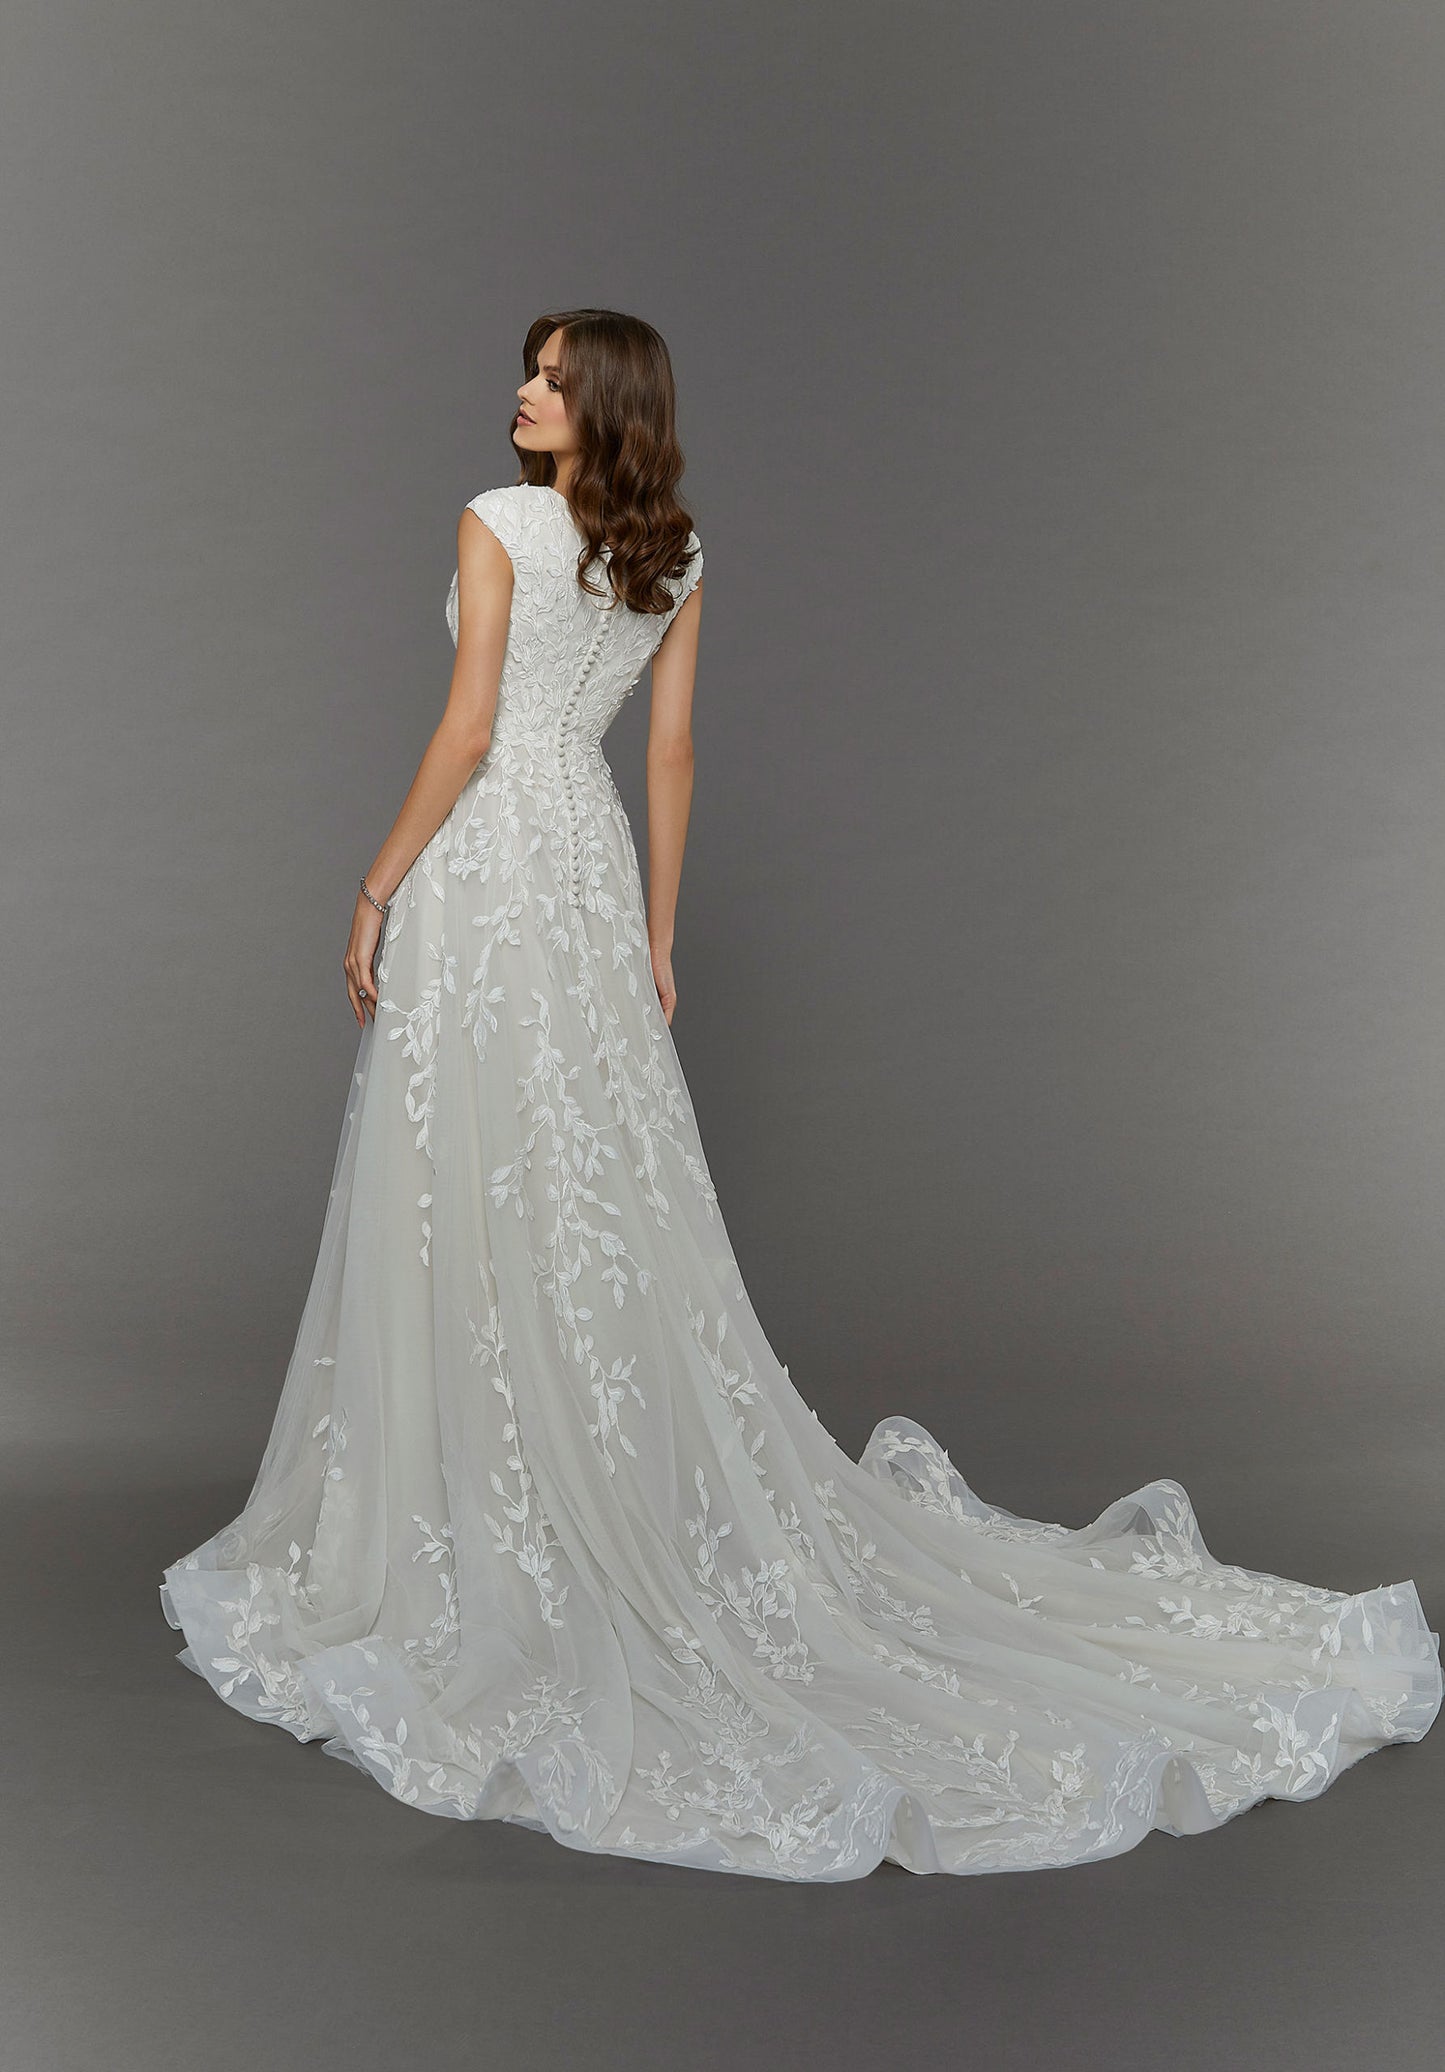 Back button view of Morilee Eleanor wedding gown